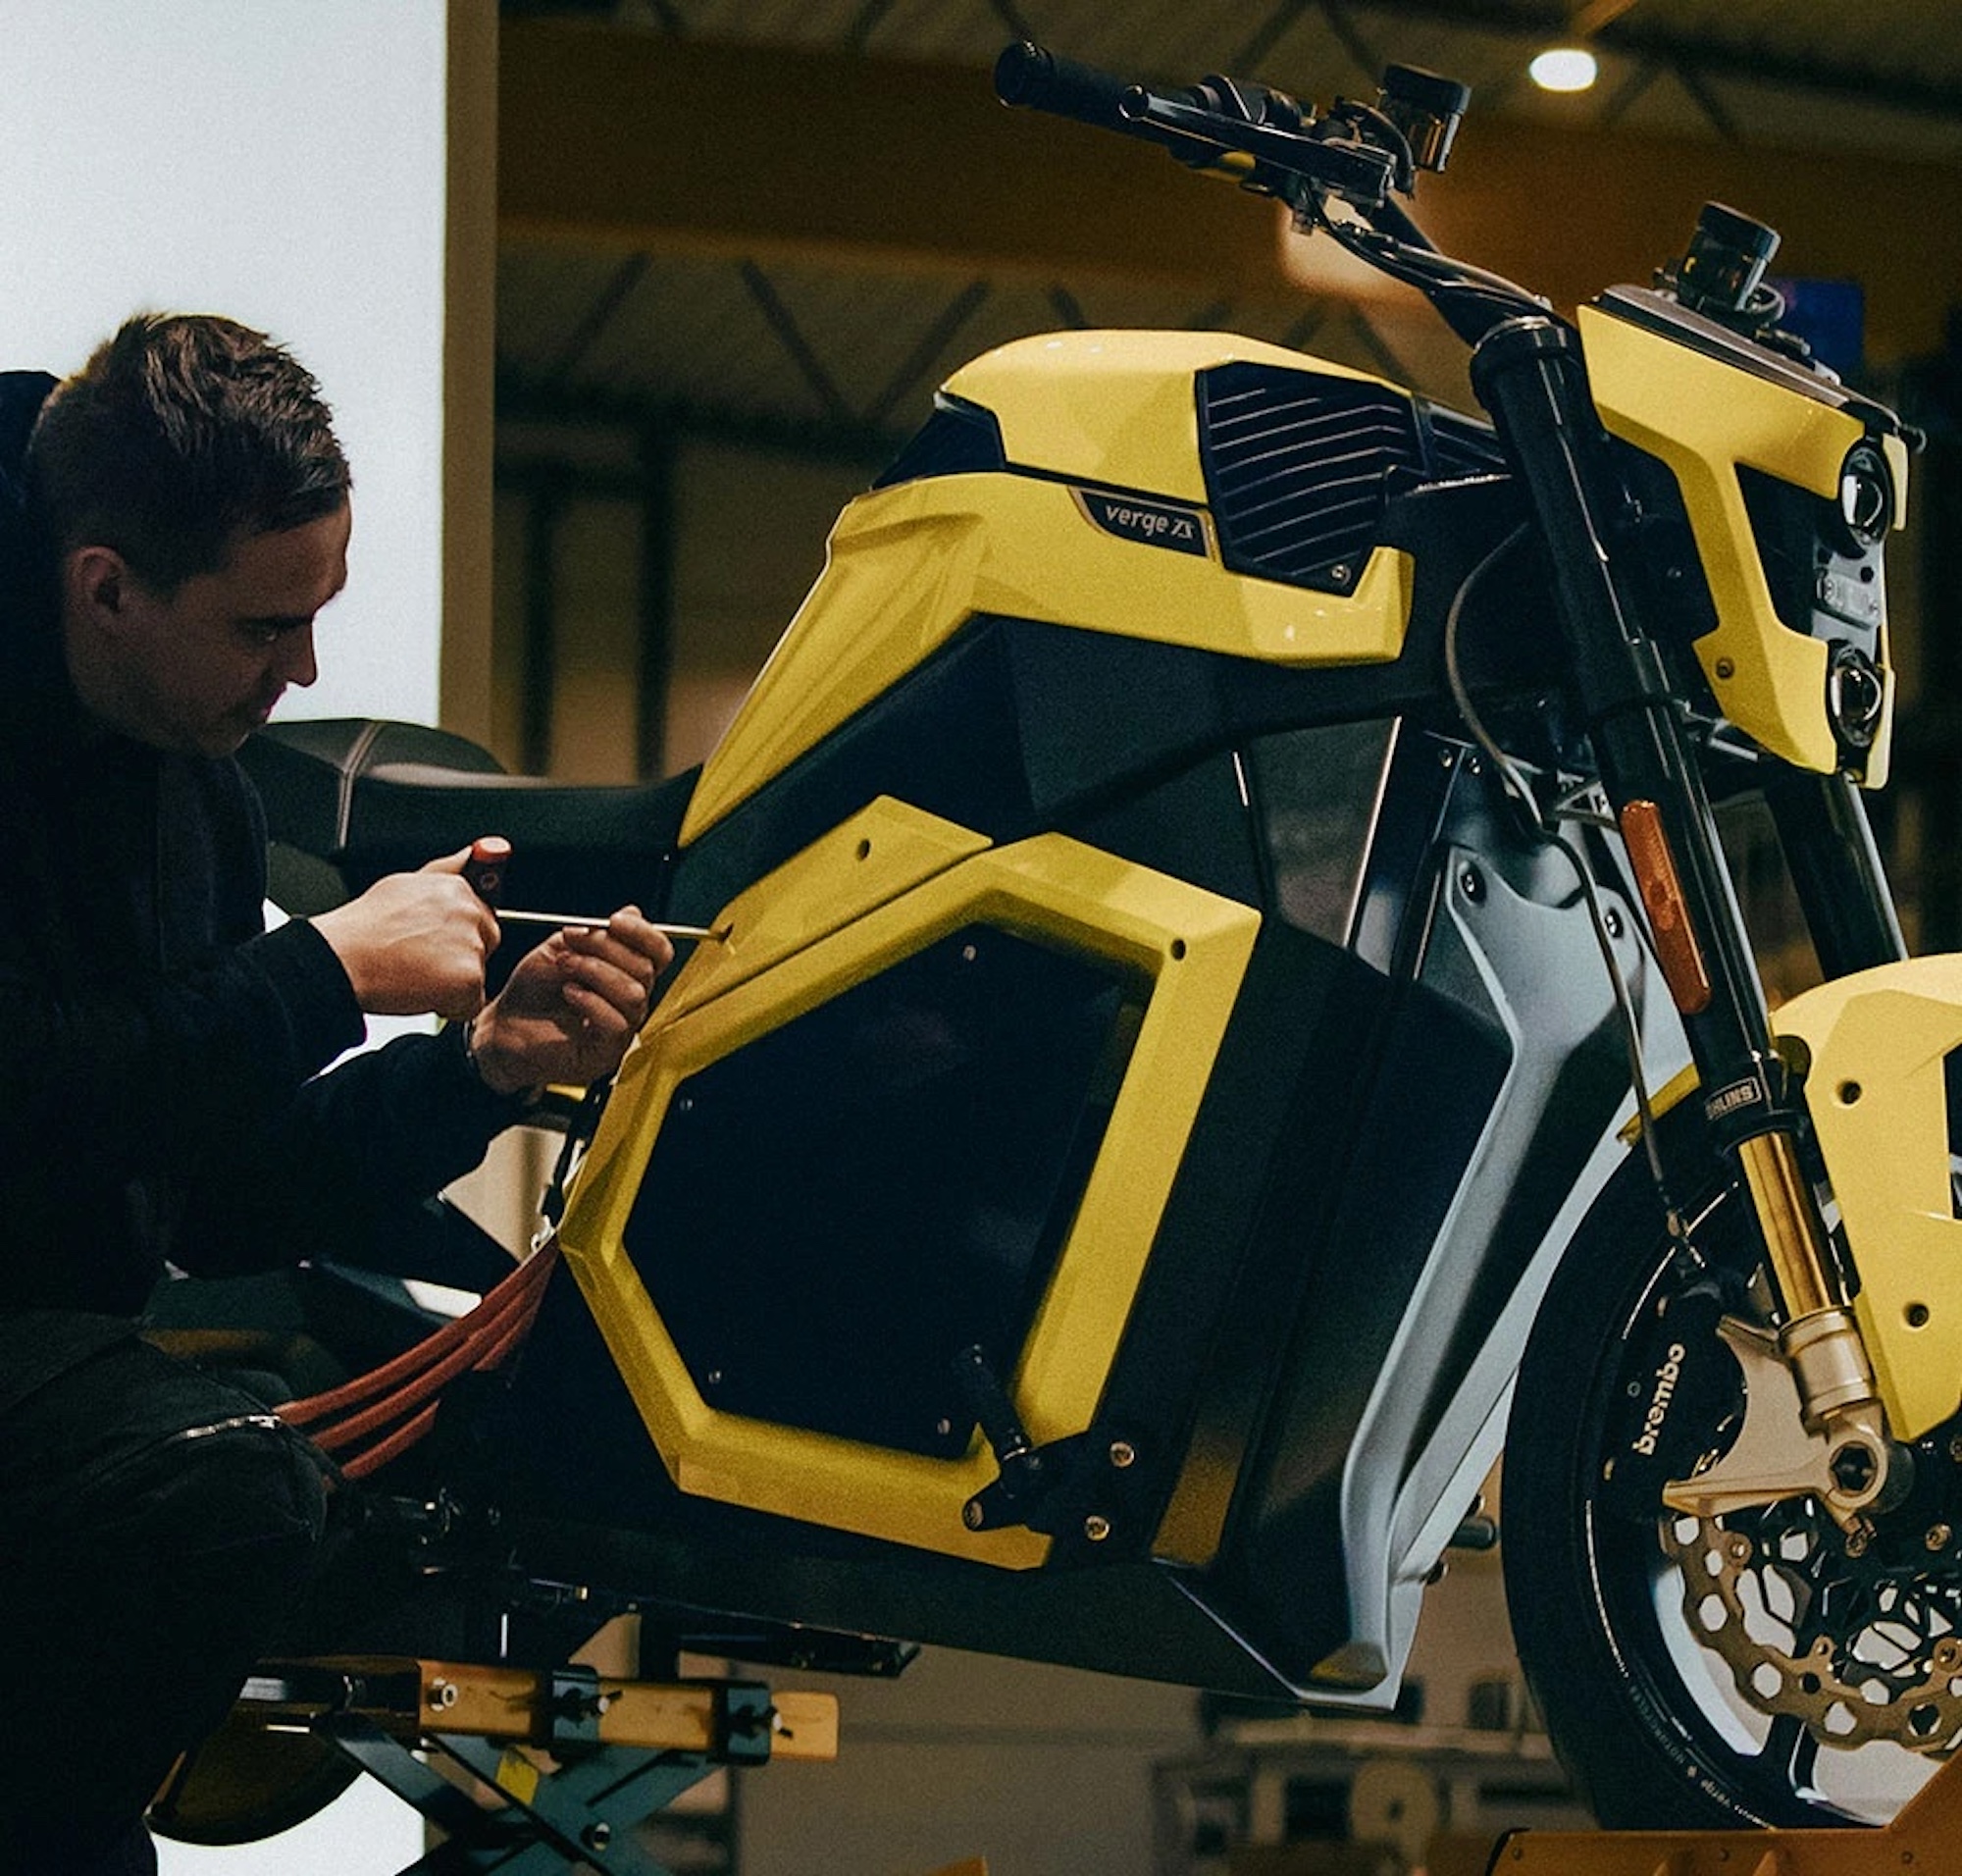 A view of an electric motorcycle from Verge Motorcycles.